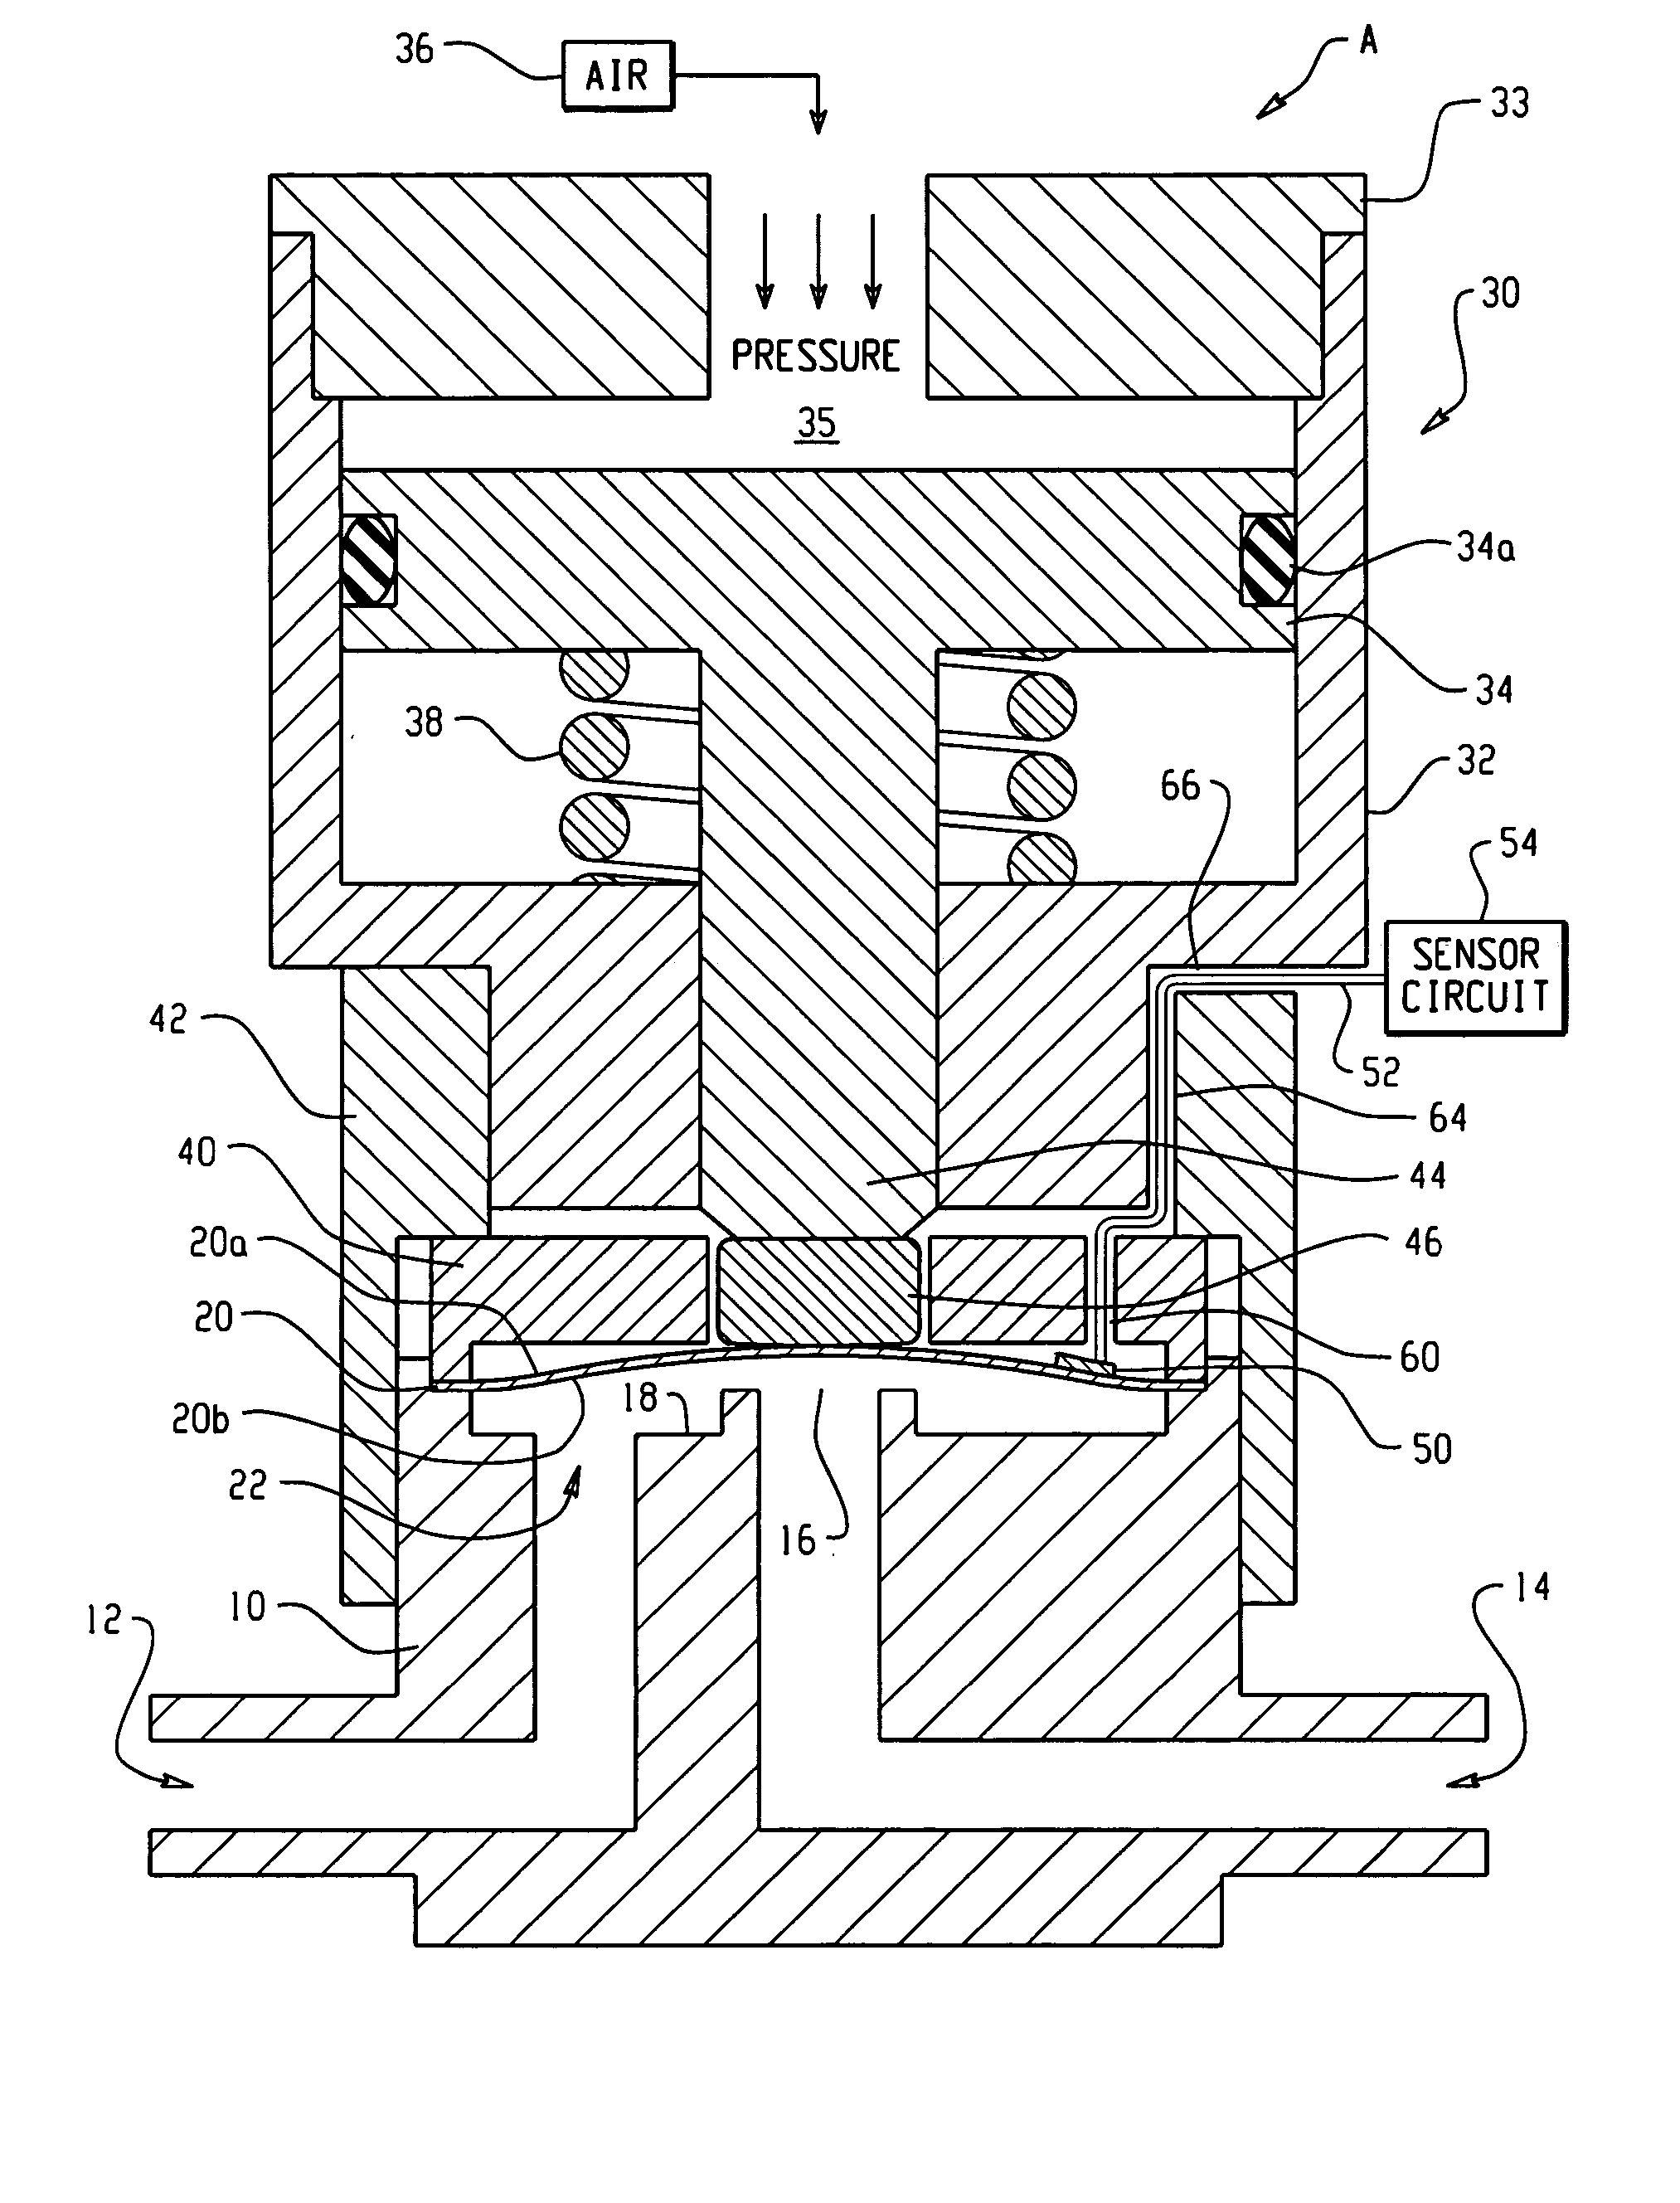 Diaphragm monitoring for flow control devices